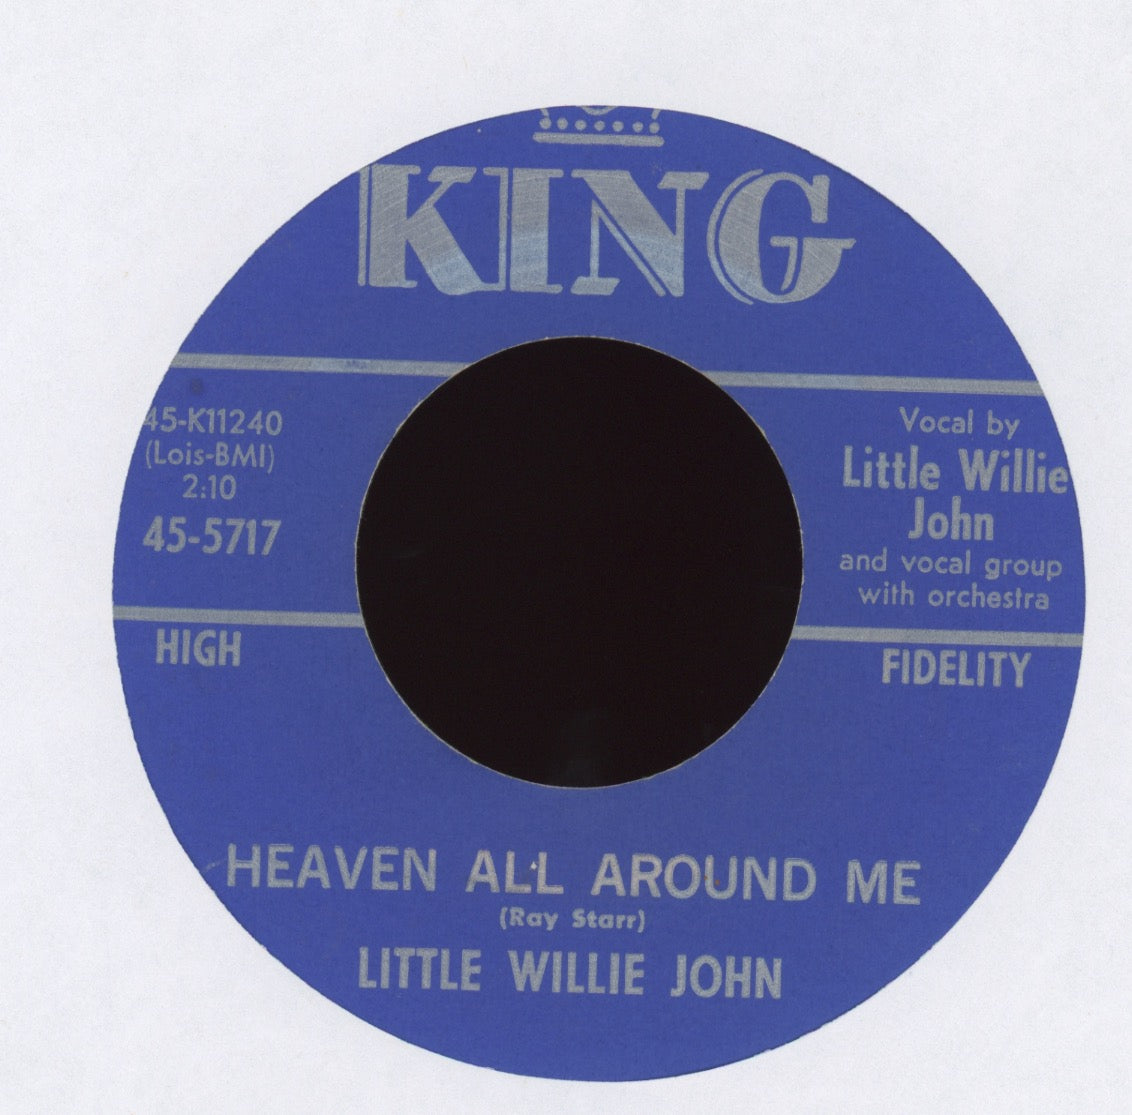 Little Willie John - Don't Play With Love on King